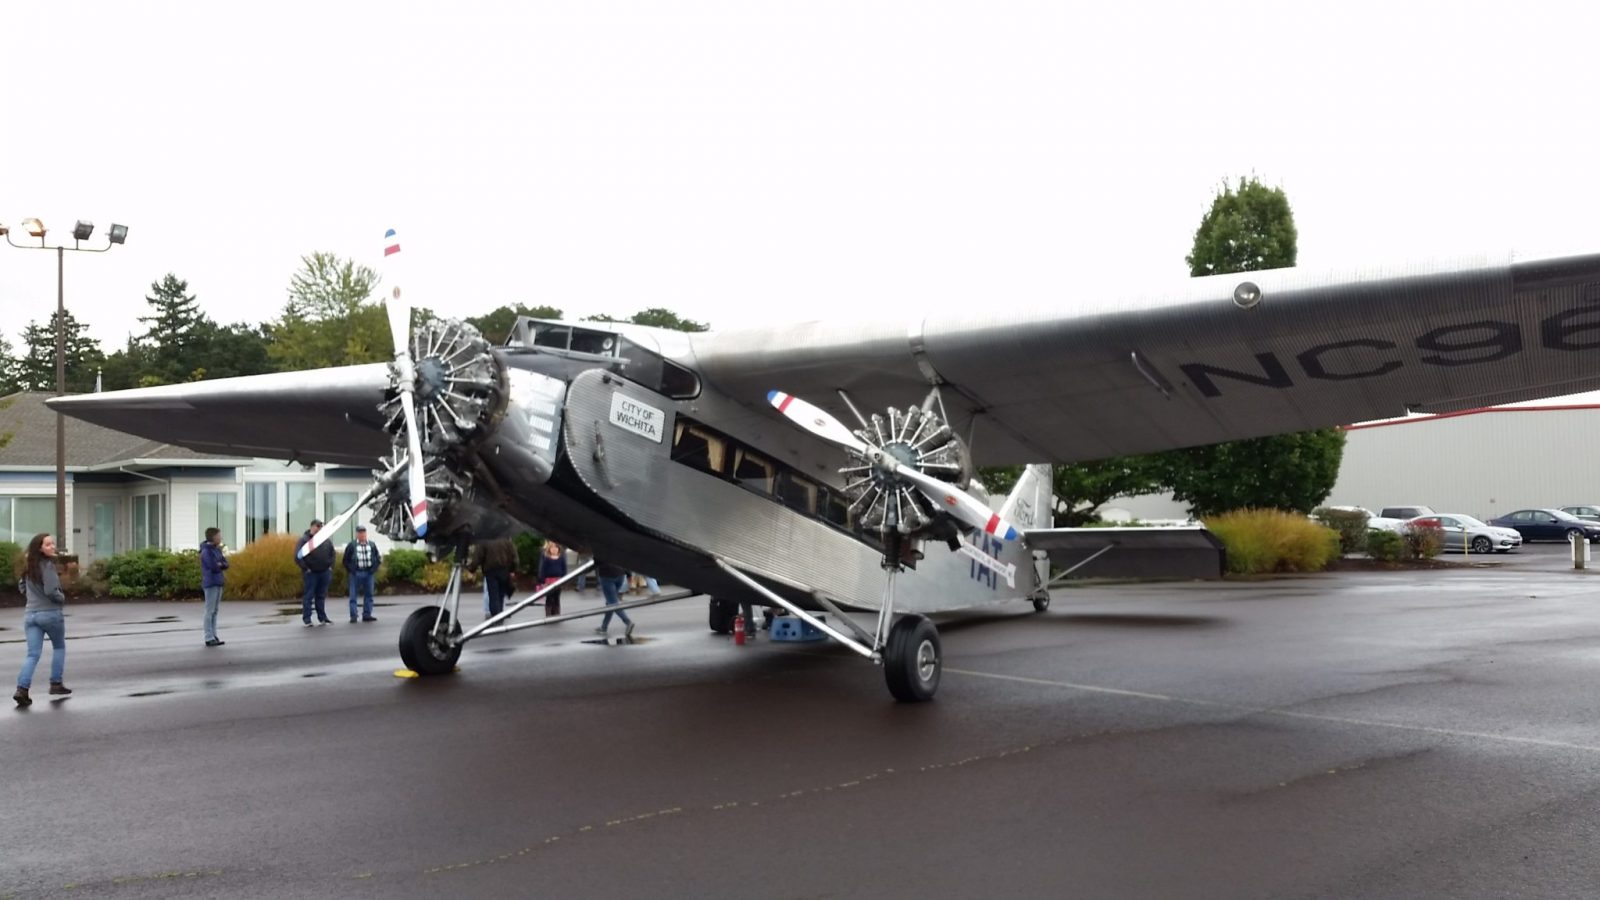 Ford Trimotor: The Civilian and Military Transport Aircraft